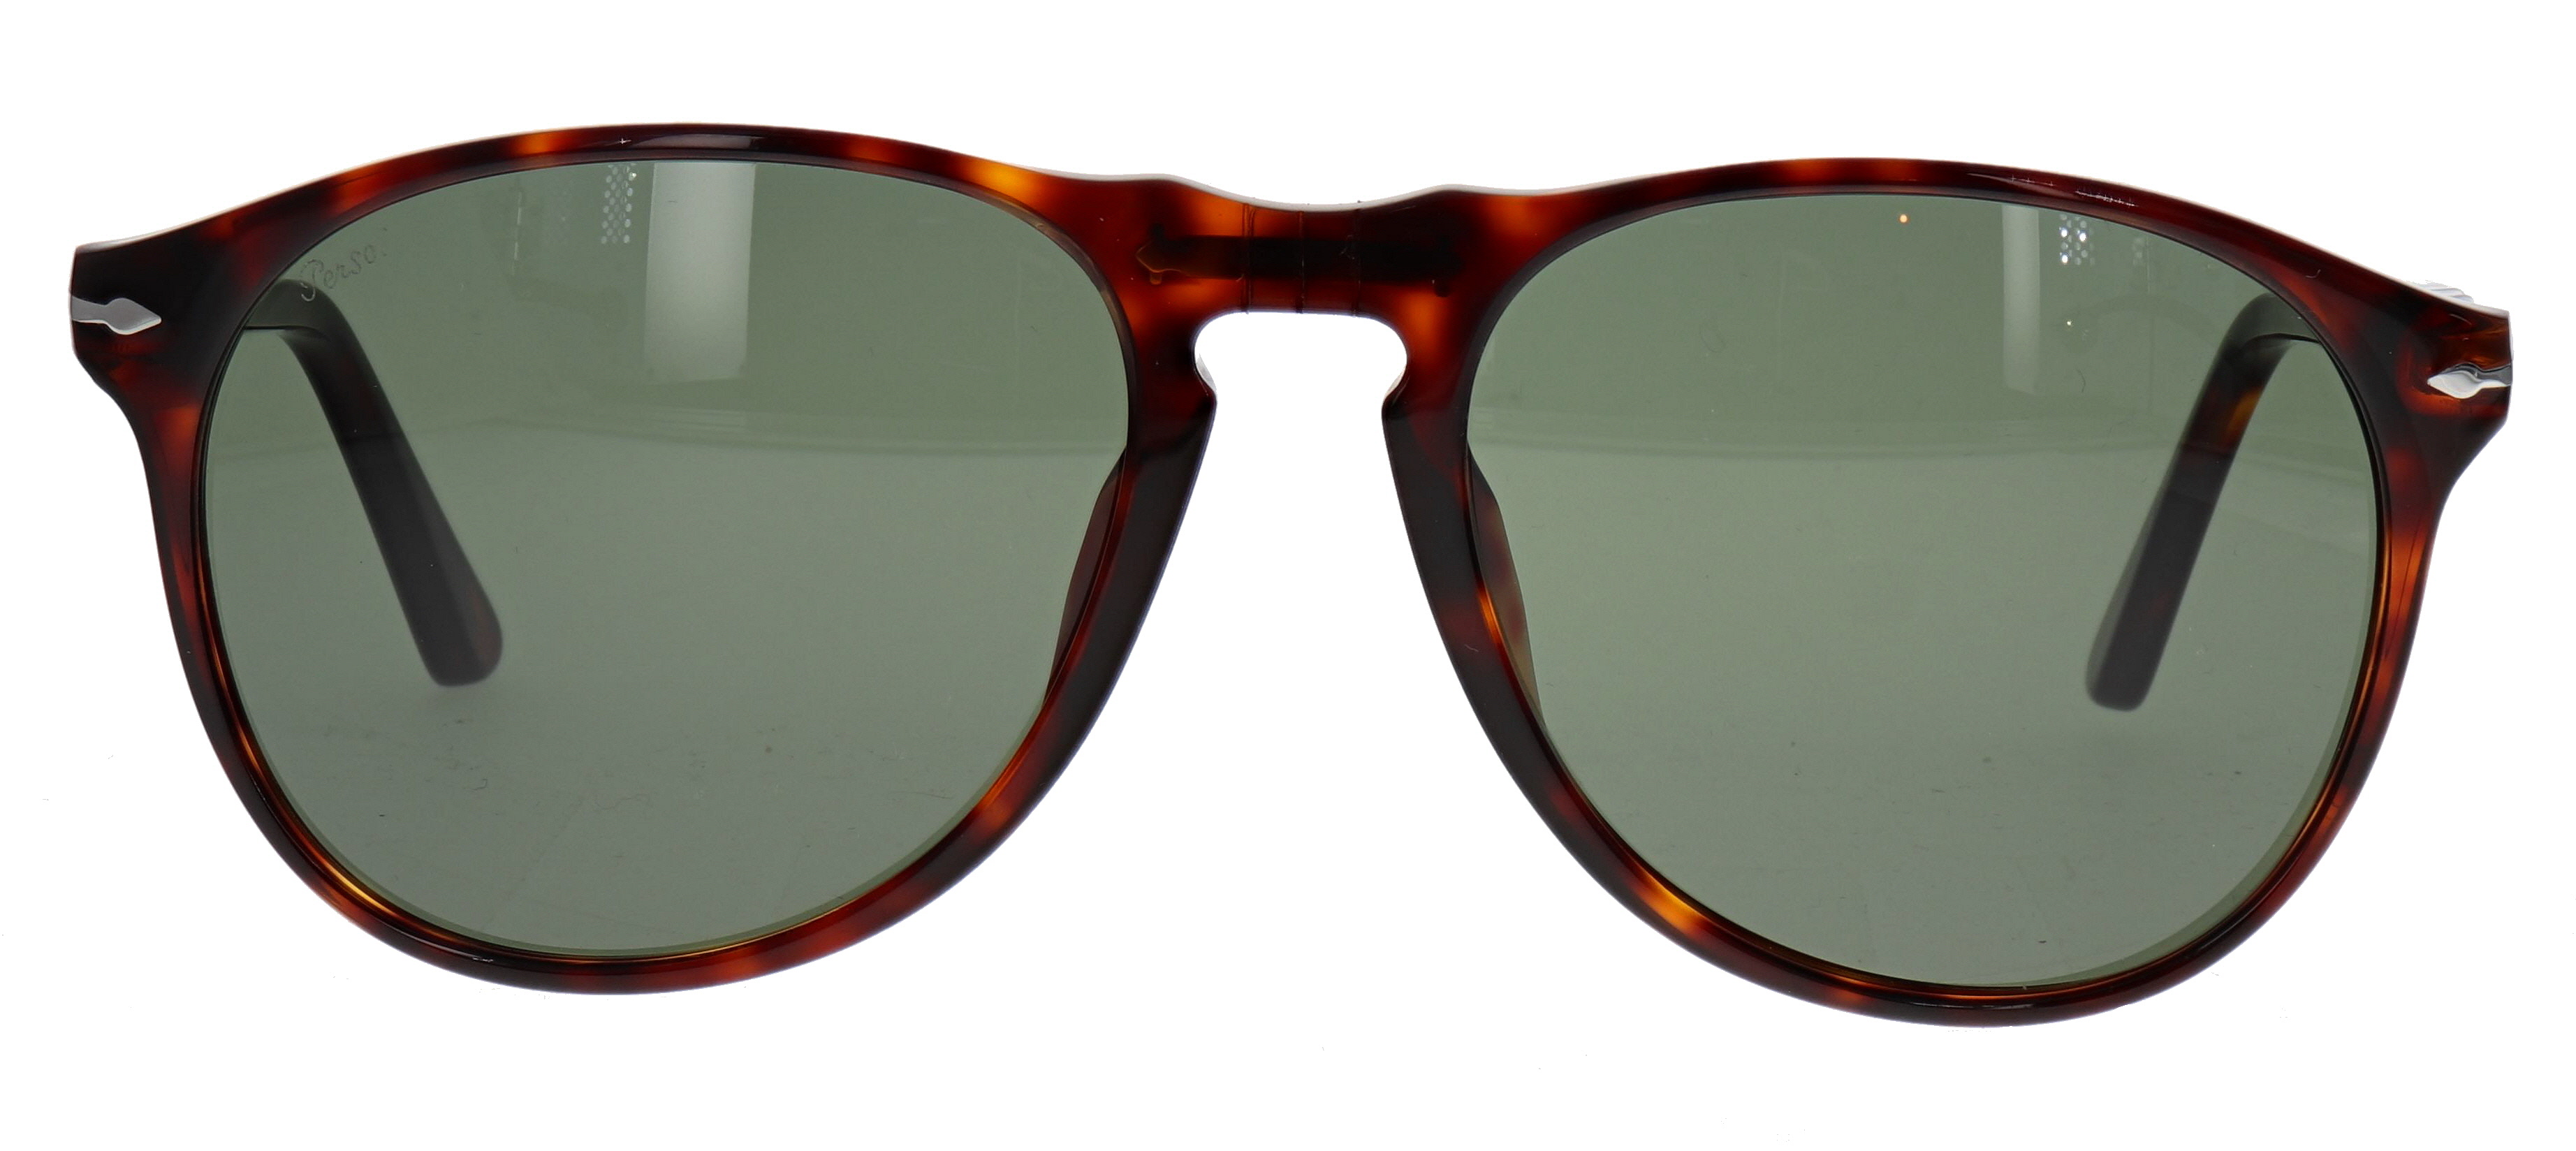 Persol 9649-S